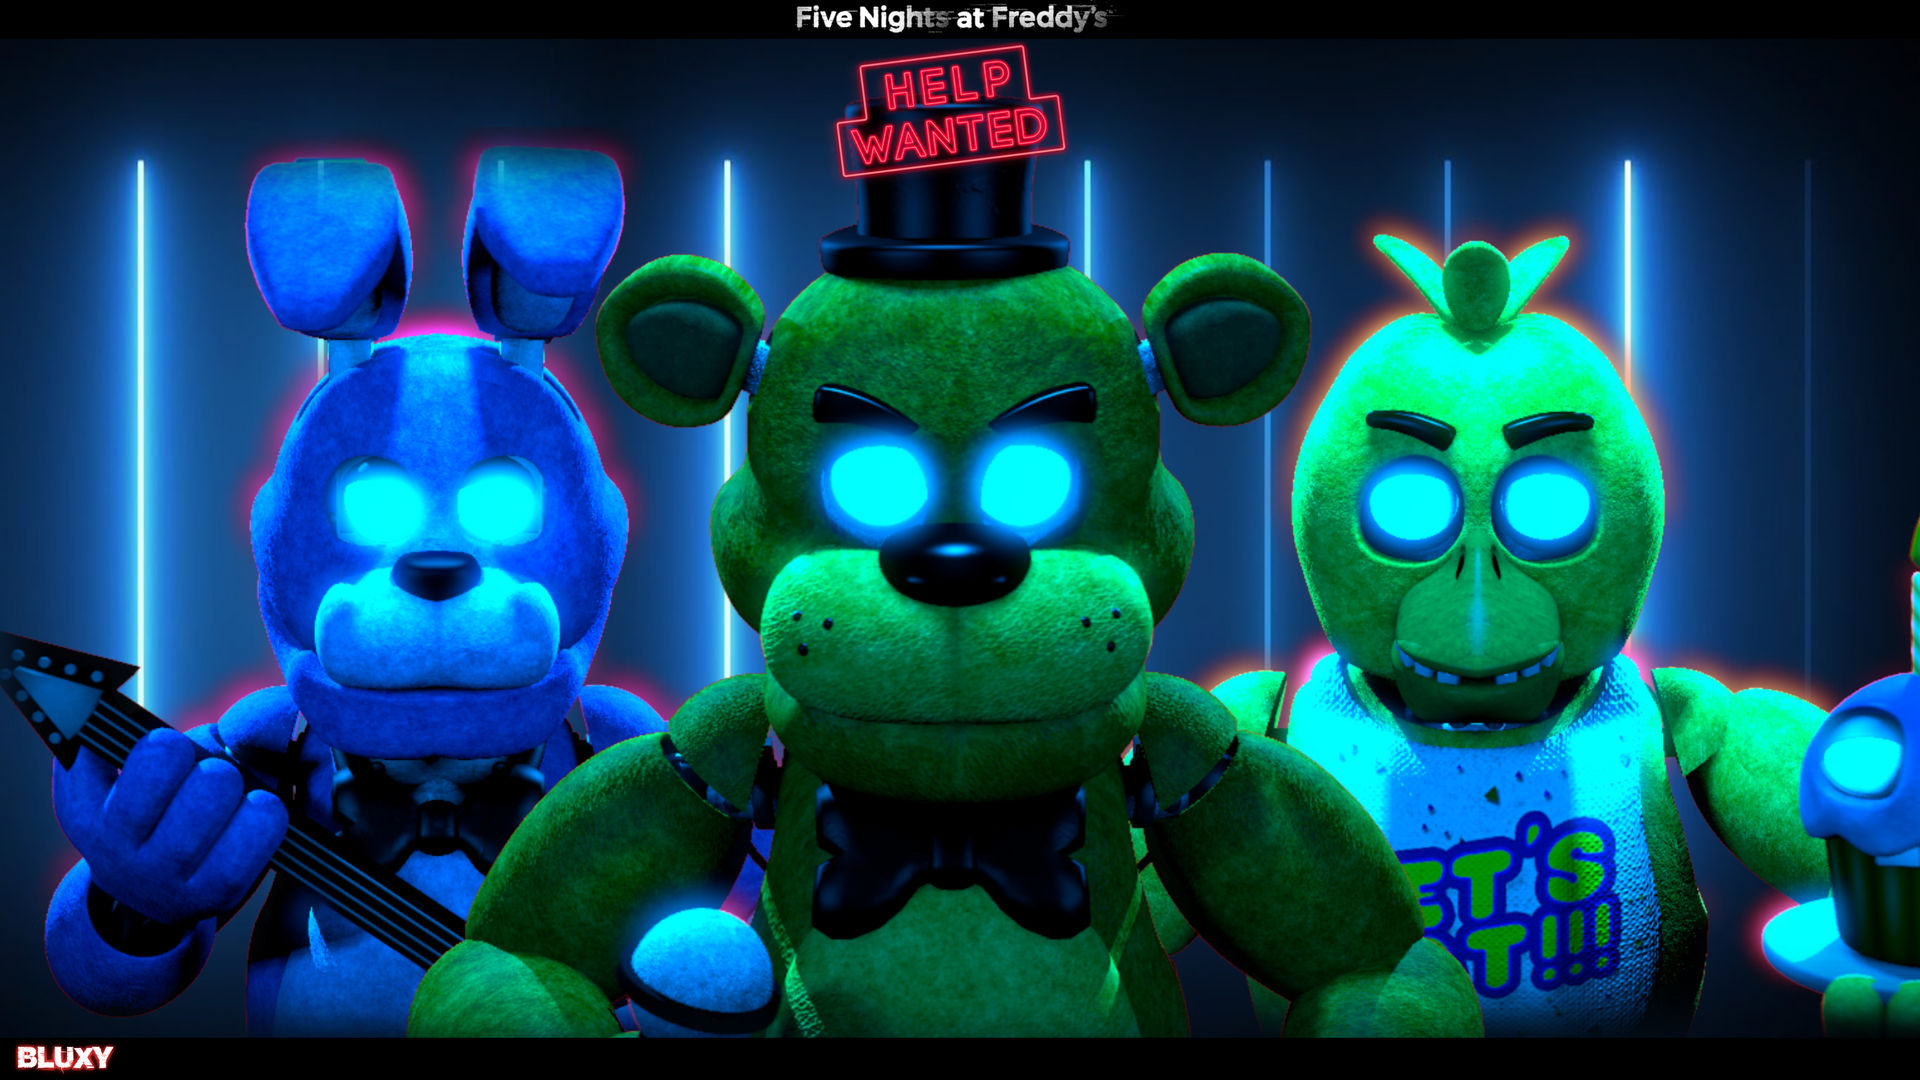 FIVE NIGHTS AT FREDDY'S: HELP WANTED (FNAF VR) 